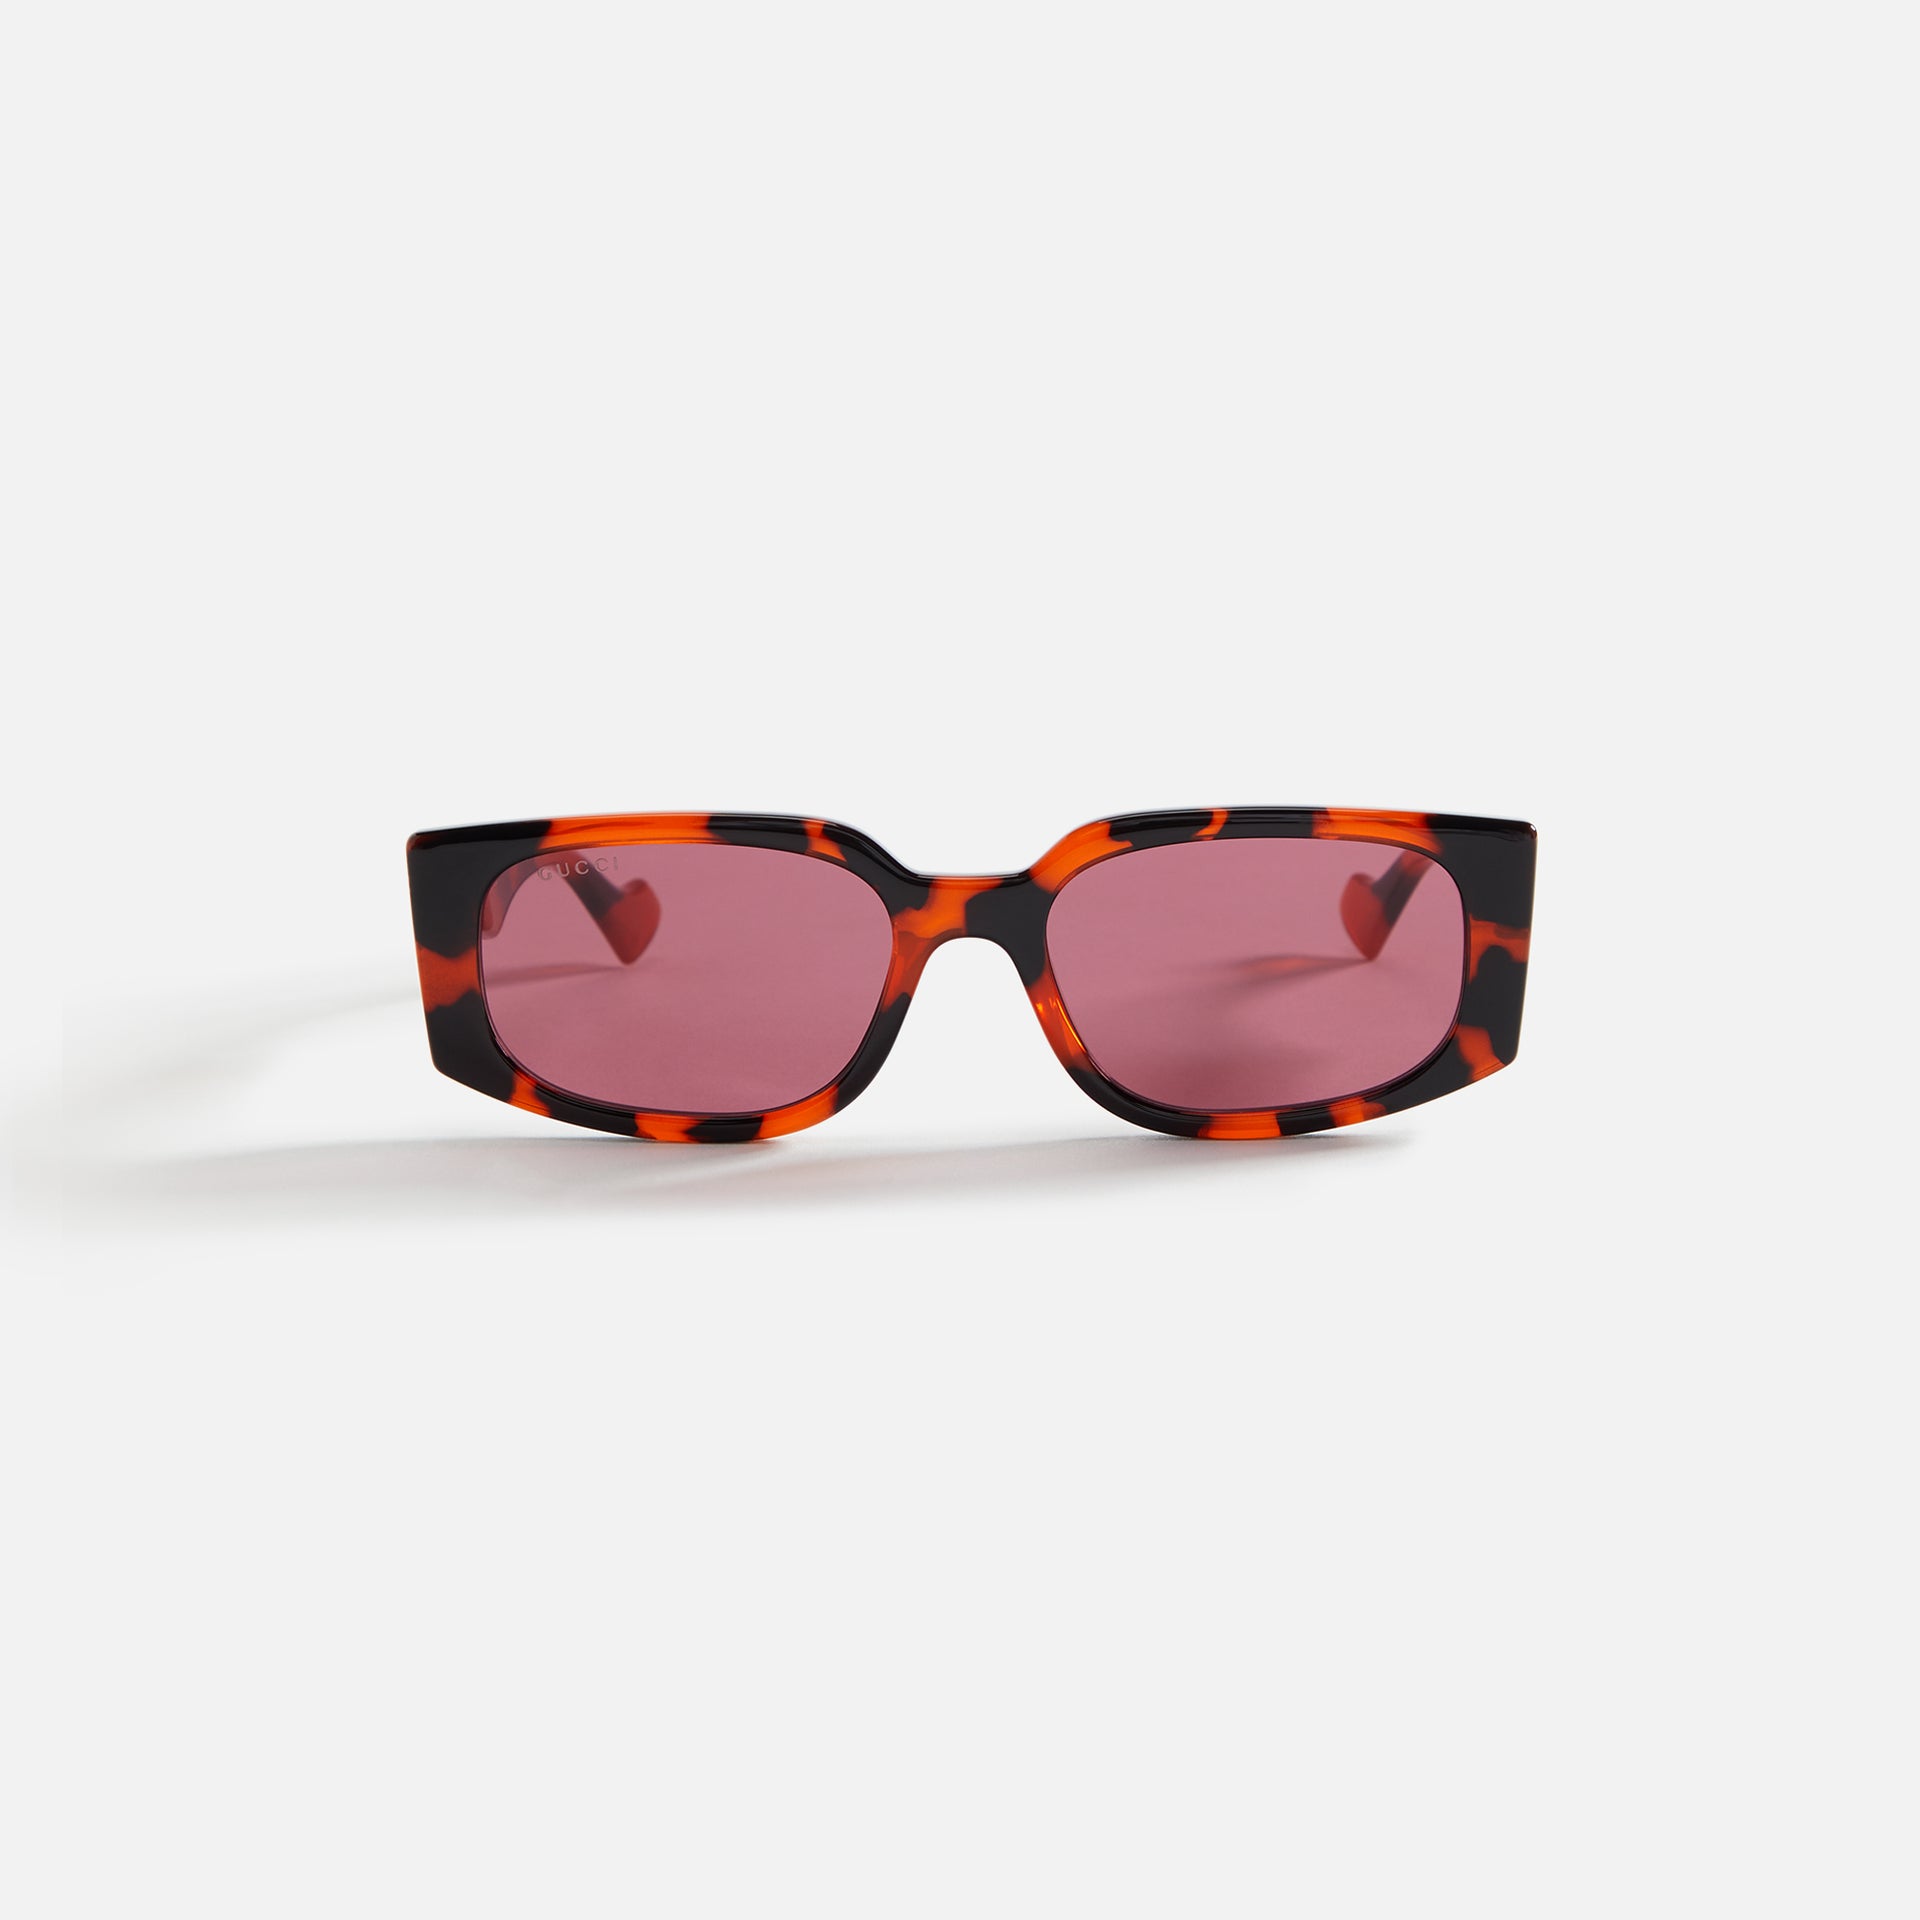 Gucci Acetate Oval 55 Frame - Brown